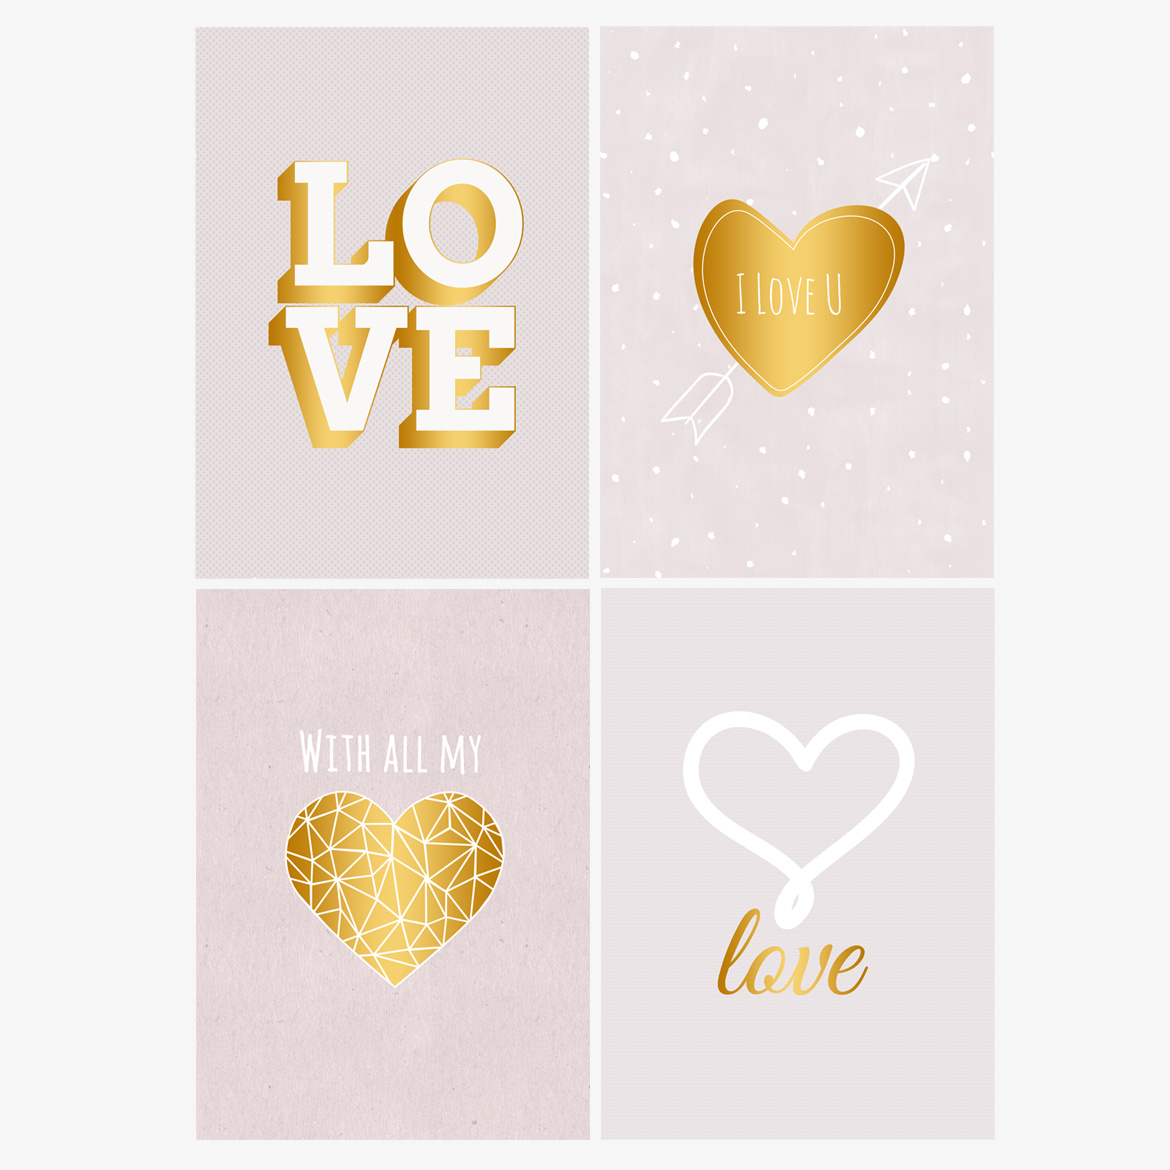 Love greeting cards